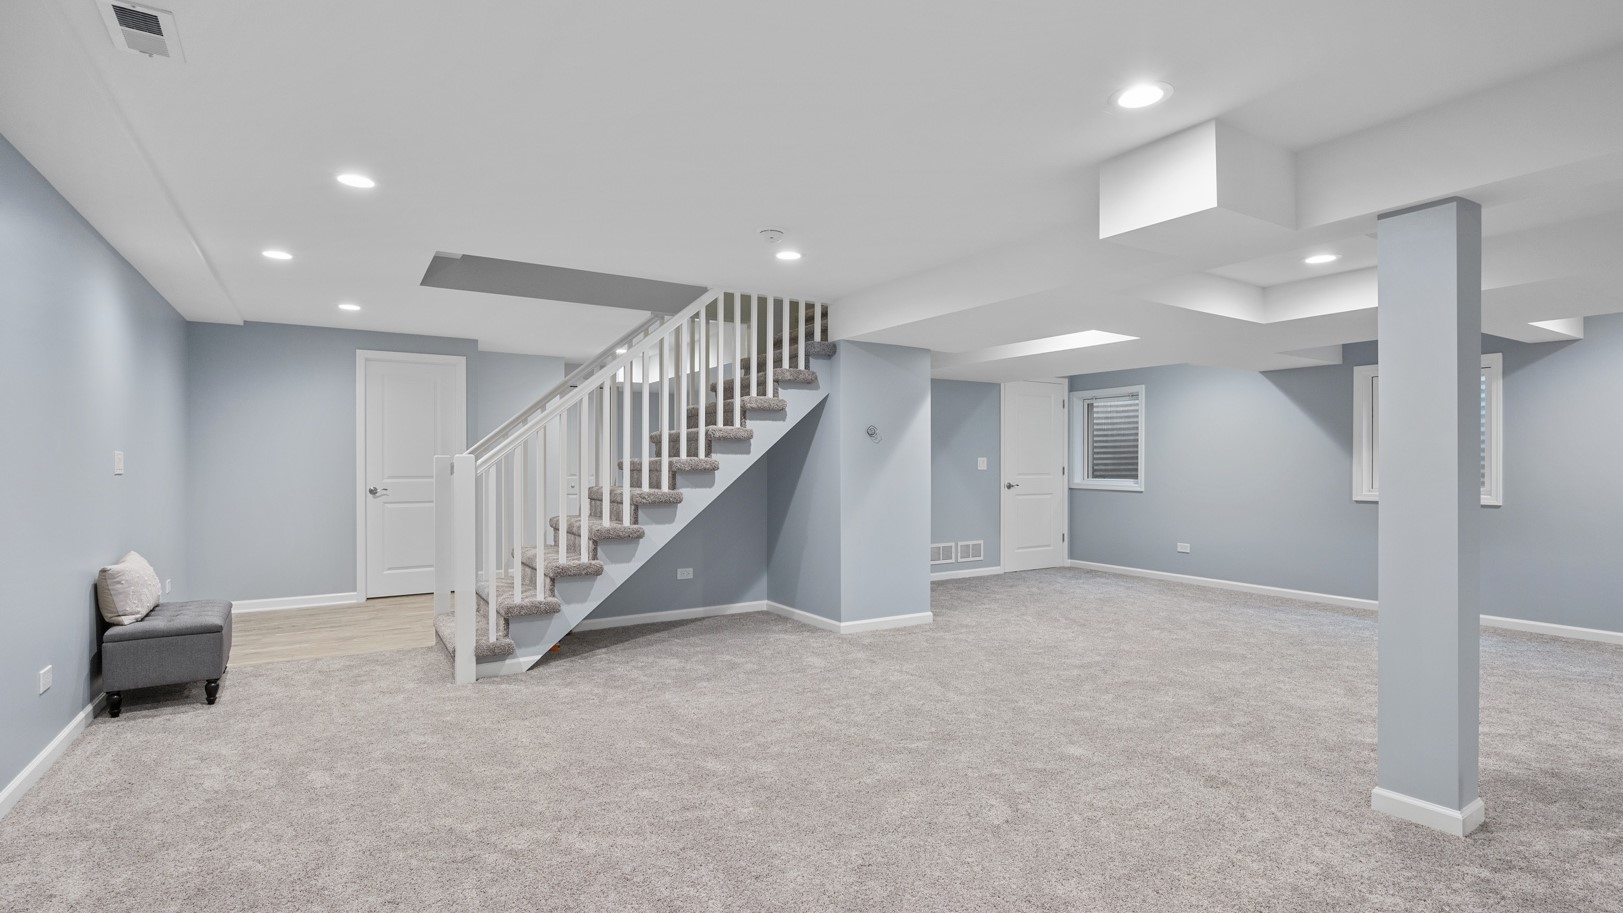 Large, open basement remodel of home in Arlington Heights, IL